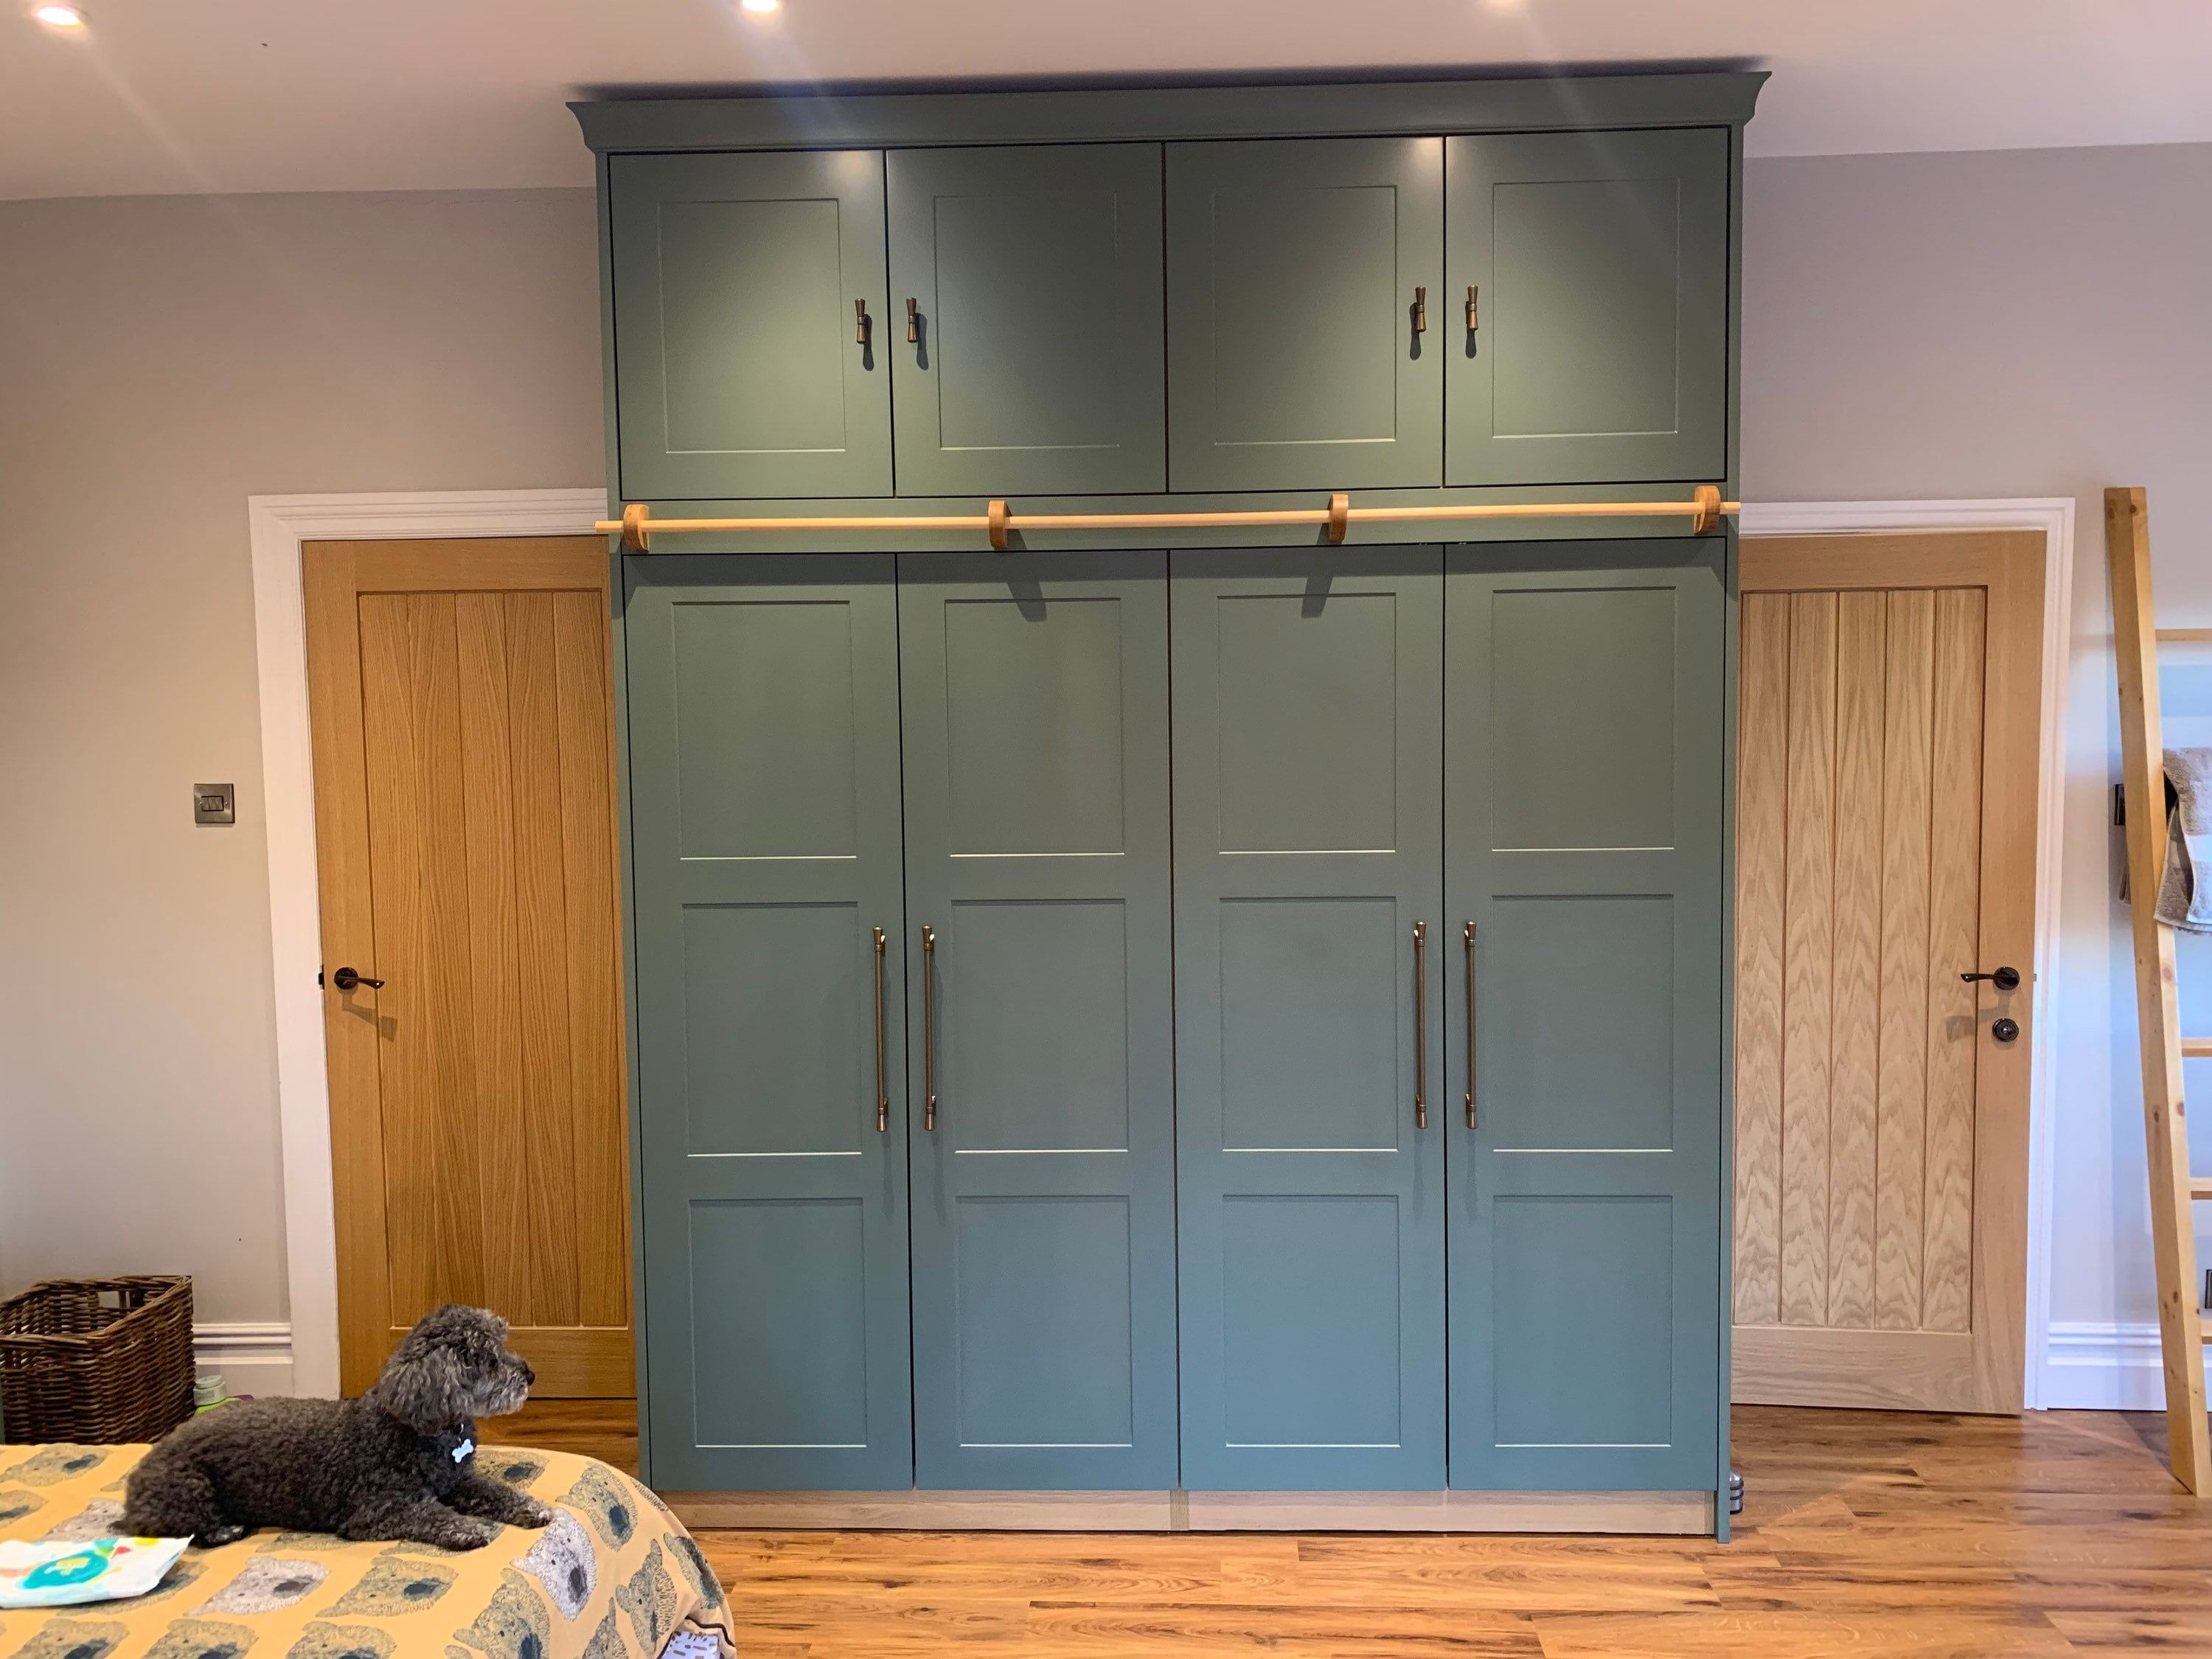 Bespoke Fitted Wardrobe Painted Doors Custom Made Wardrobes With Bespoke  Storage Solutions – Etsy Intended For Solid Wood Fitted Wardrobes Doors (Gallery 1 of 20)